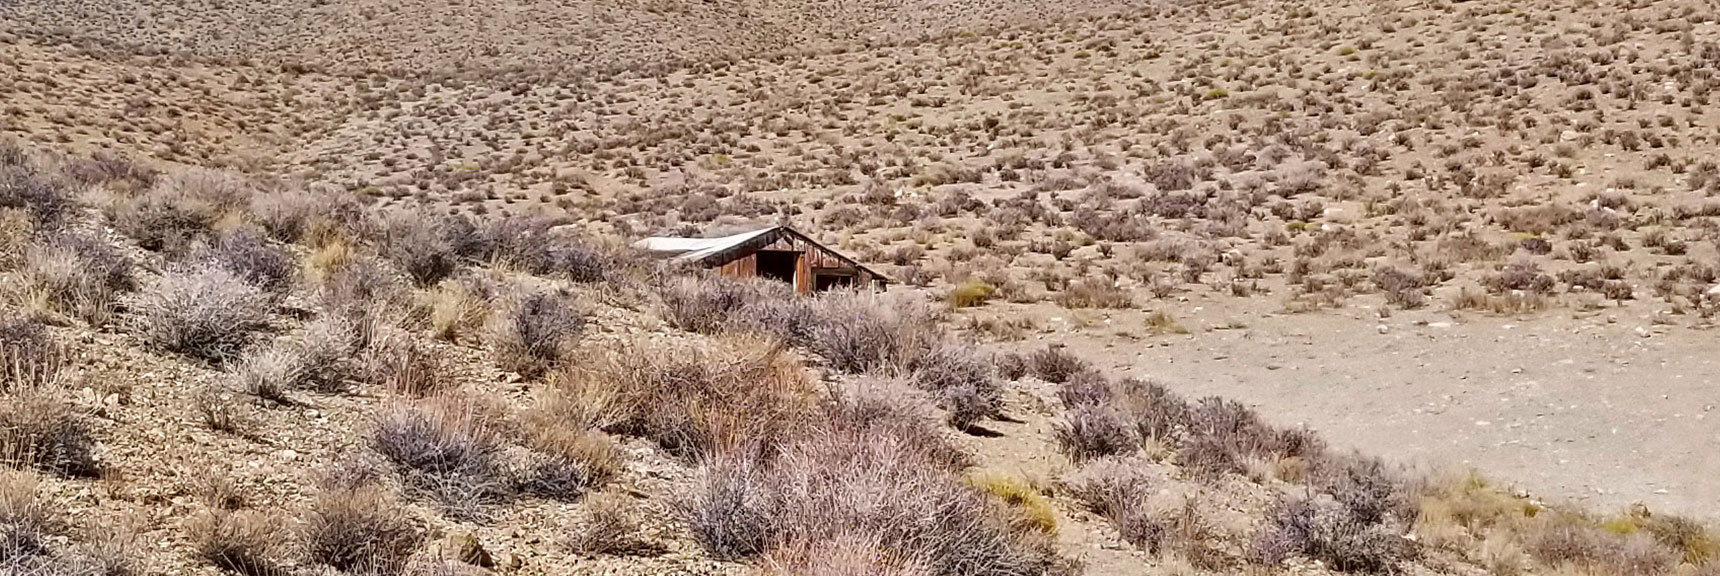 More Elaborate Mining Cabin with Large Railroad Ties for Walls | Skidoo Stamp Mill, Panamint Mountains, Death Valley National Park, CA